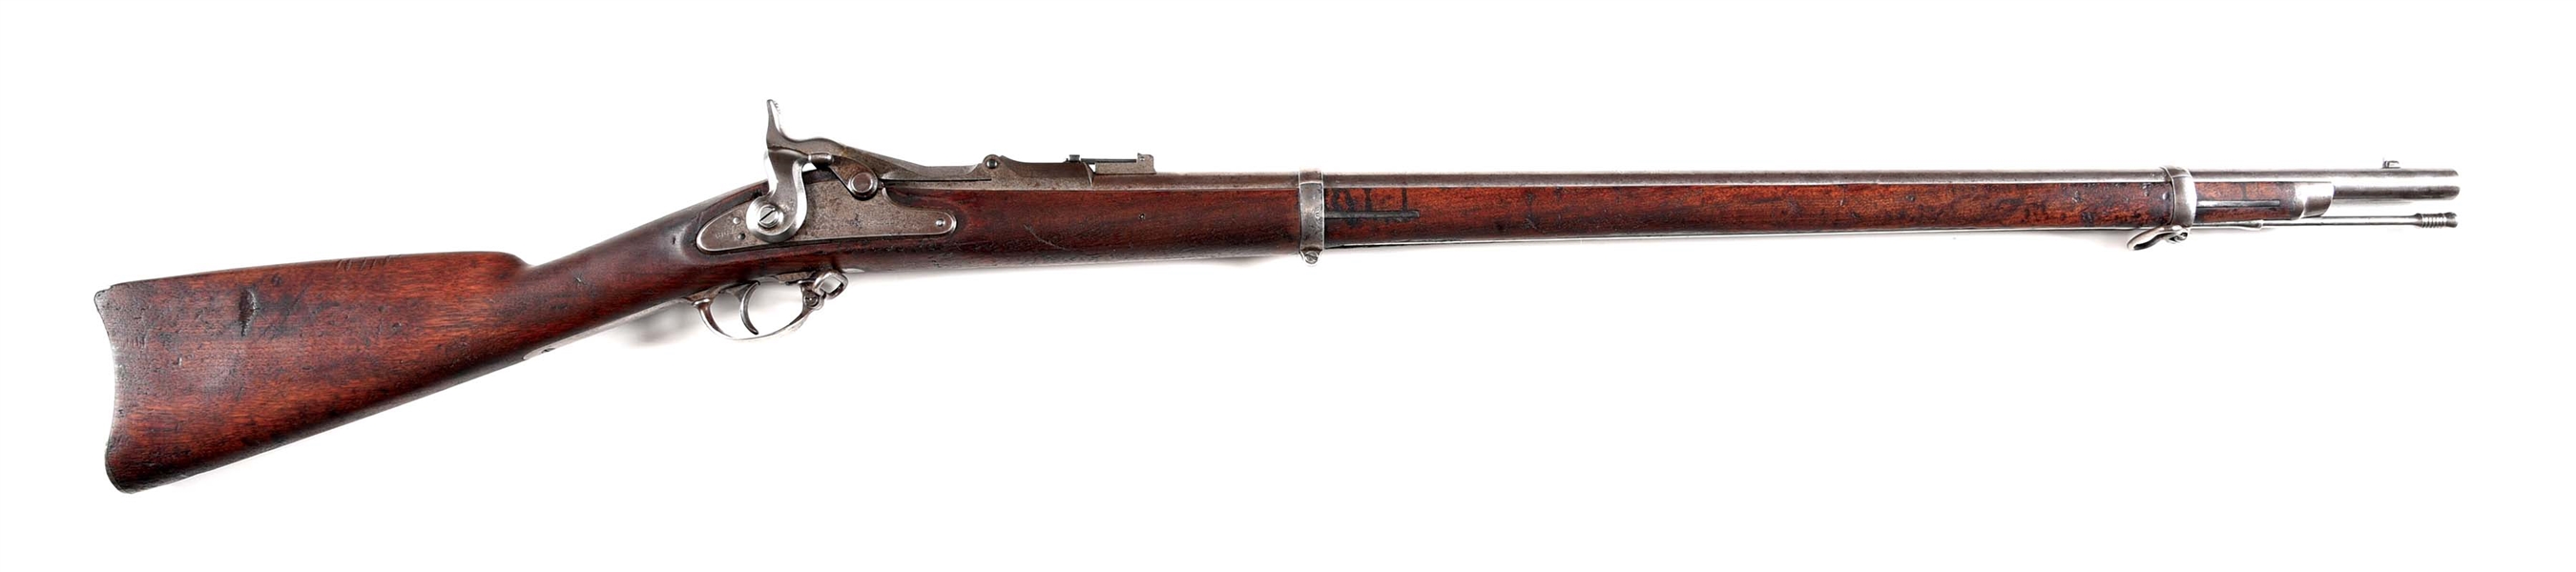 (A) US SPRINGFIELD MODEL 1868 TRAPDOOR RIFLE DATED 1870.